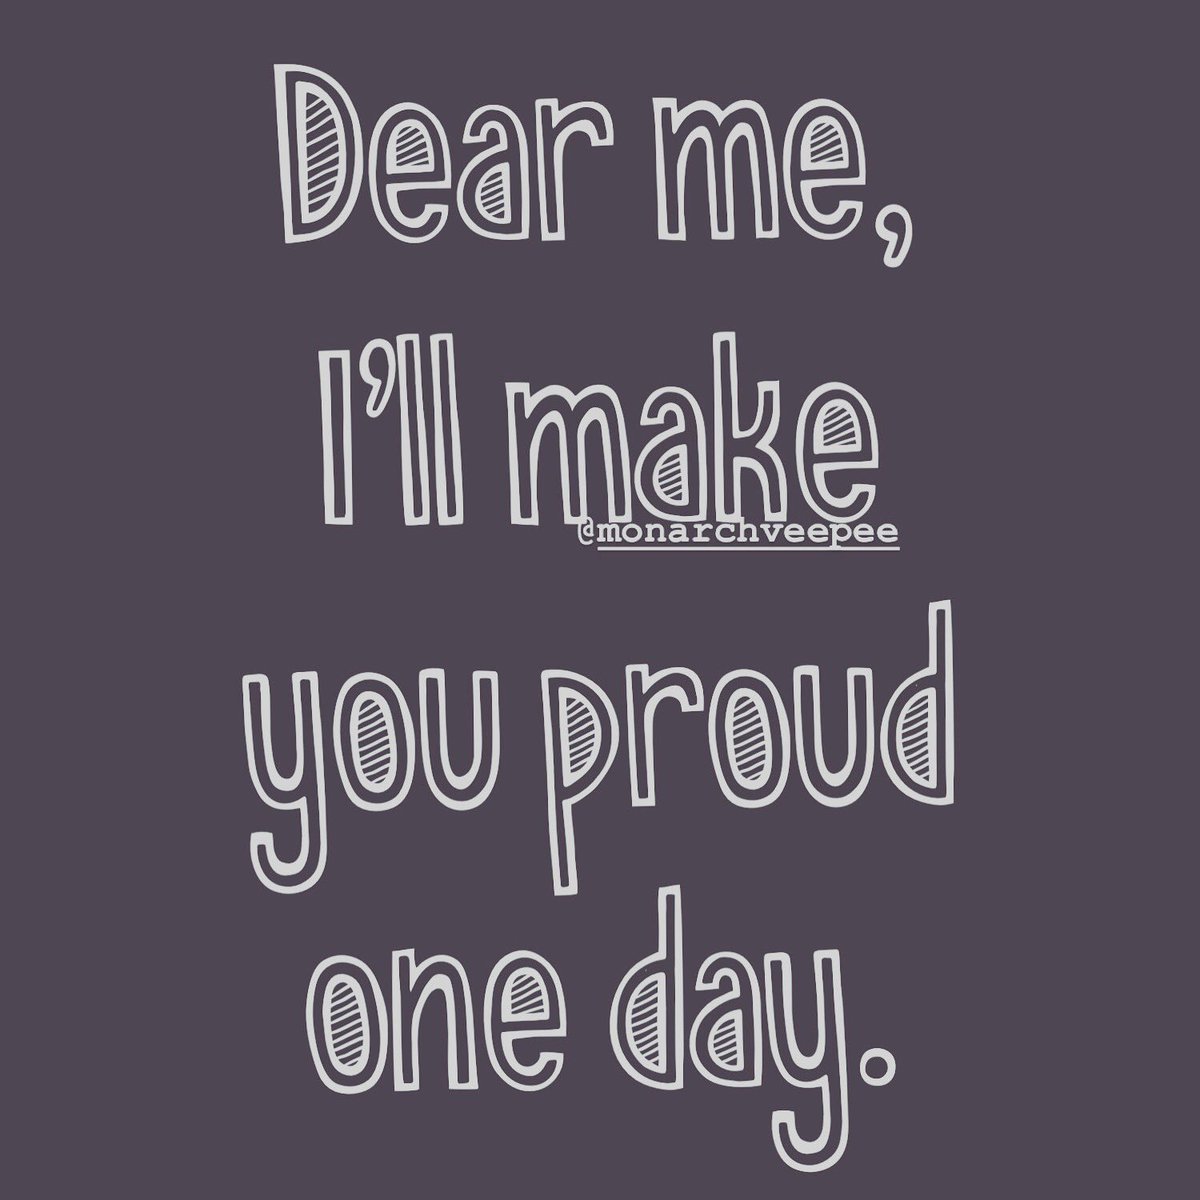 Vasant Panchasara Dear Me I Ll Make You Proud One Day Brotherhood Is Happiness Instaquote Quoteoftheday Monarchveepee